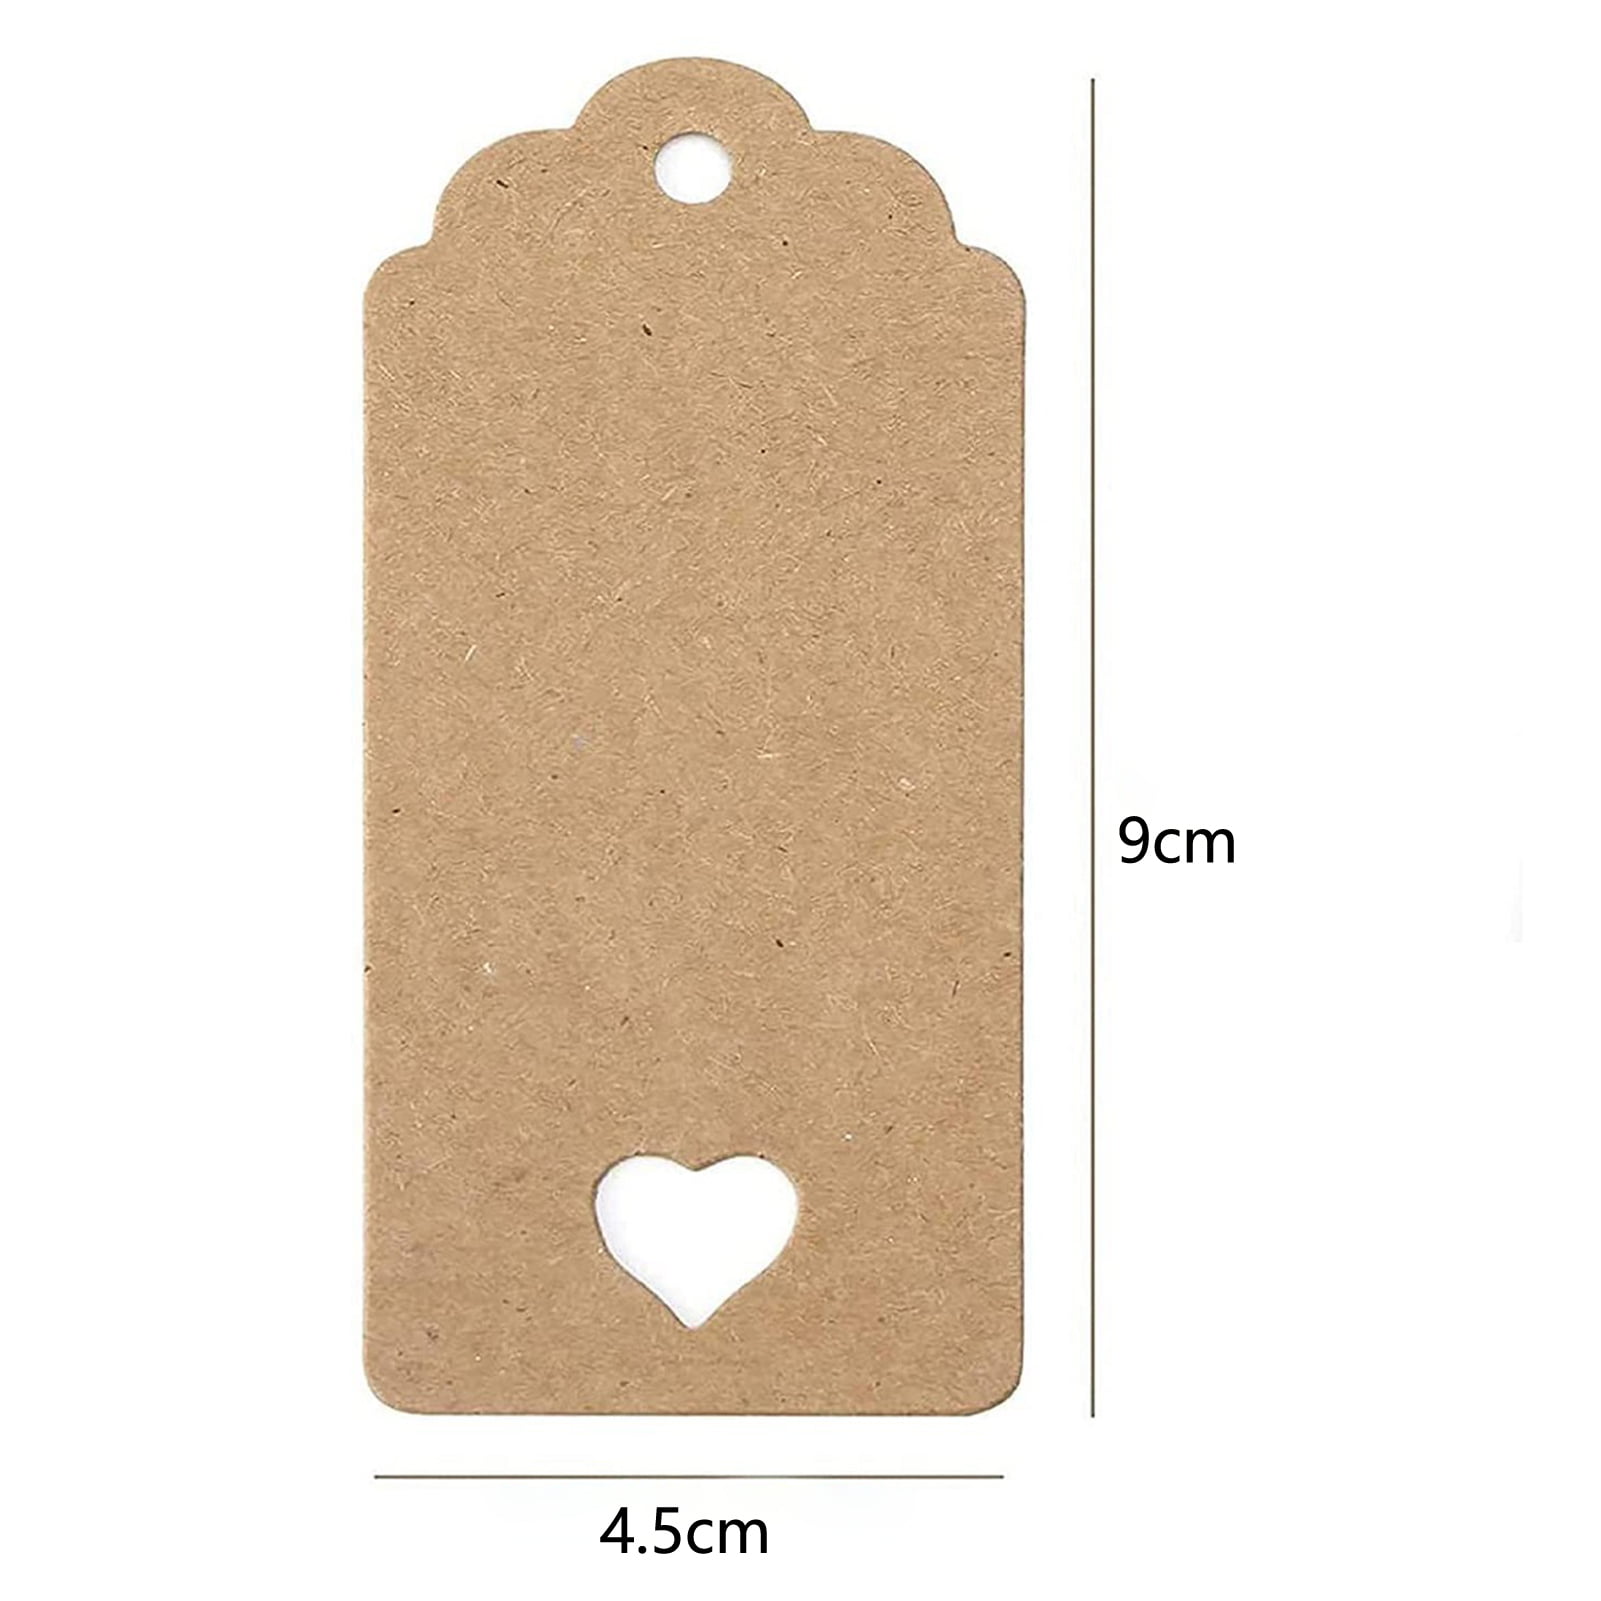 100pcs Blank Fan Shape Kraft Paper Gift Tags Label With Ropes Gift  Packaging Cards For Wedding Birthday Party Baby Shower Decor